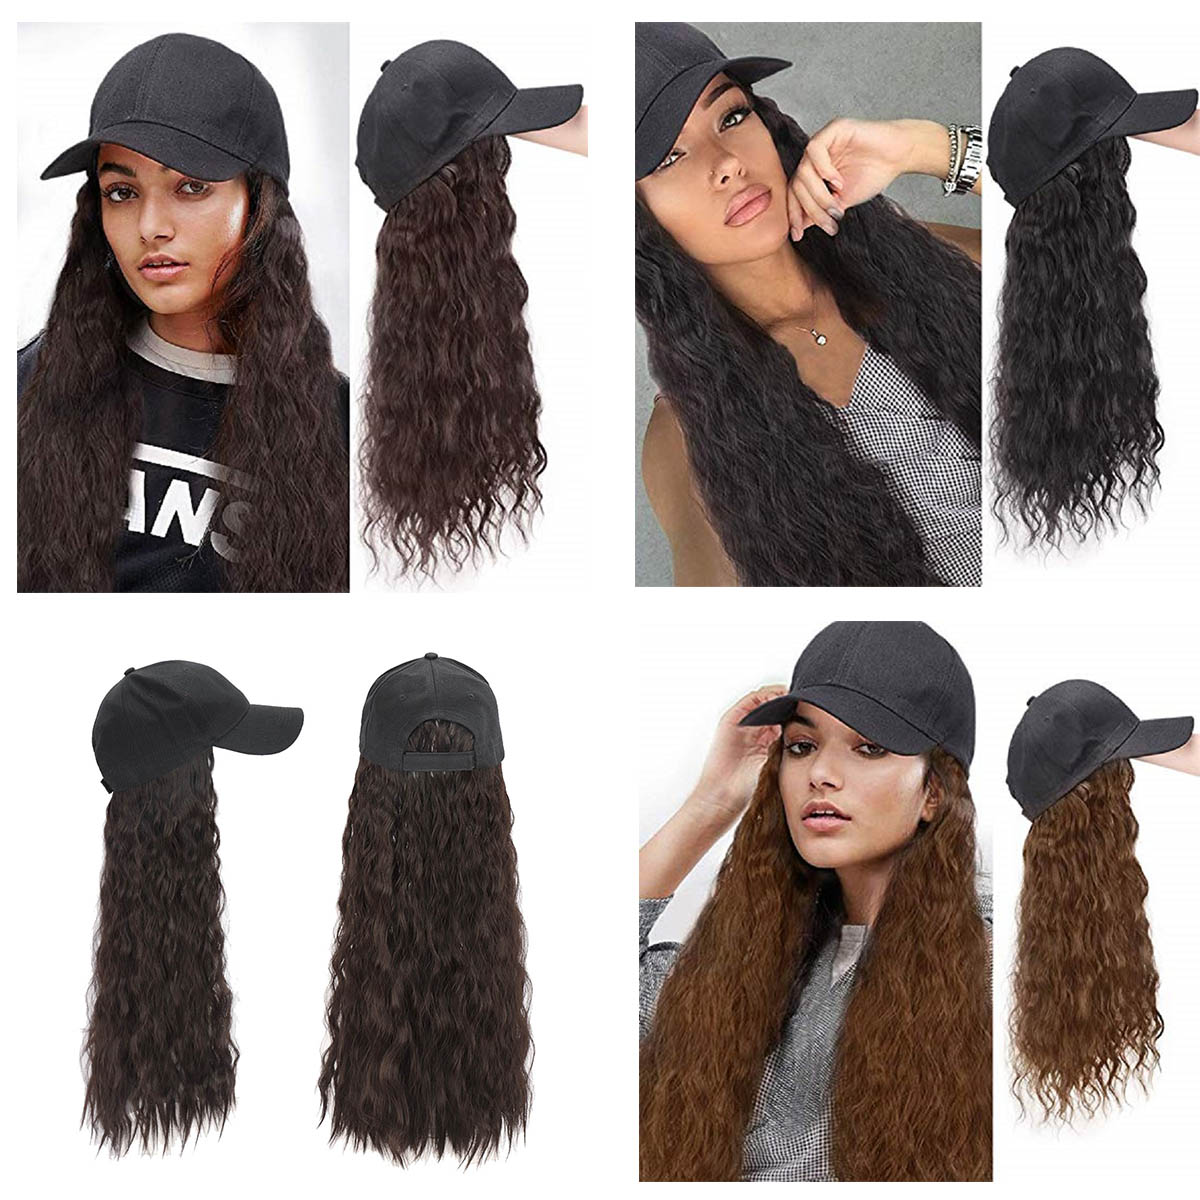 Woman-Girl-Cap-Wig-Hat-Light-Long-Wavy-Halloween-Party-Curly--Club-Winter-1619885-2